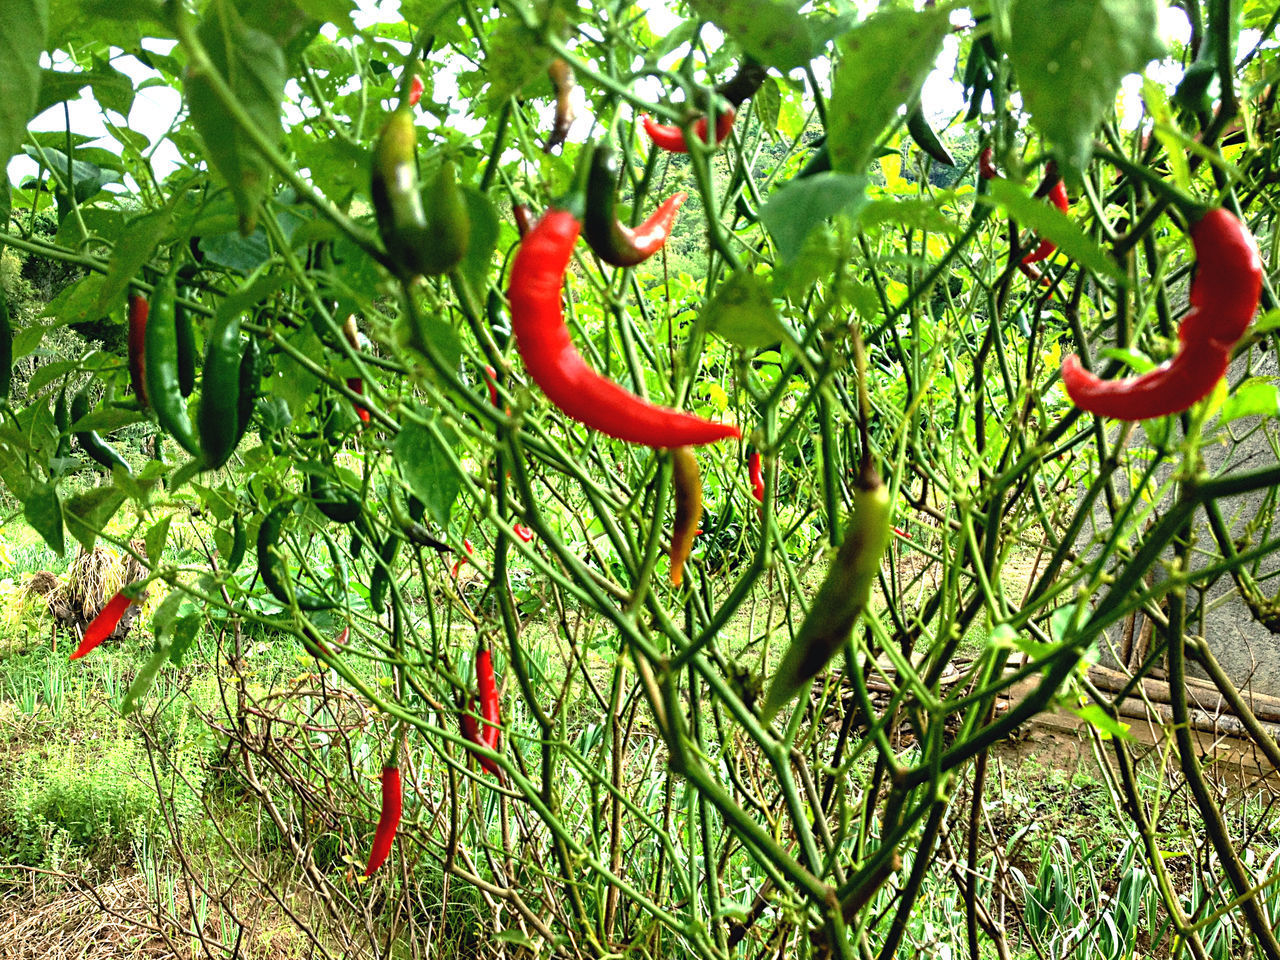 RED CHILI PEPPERS BY TREE